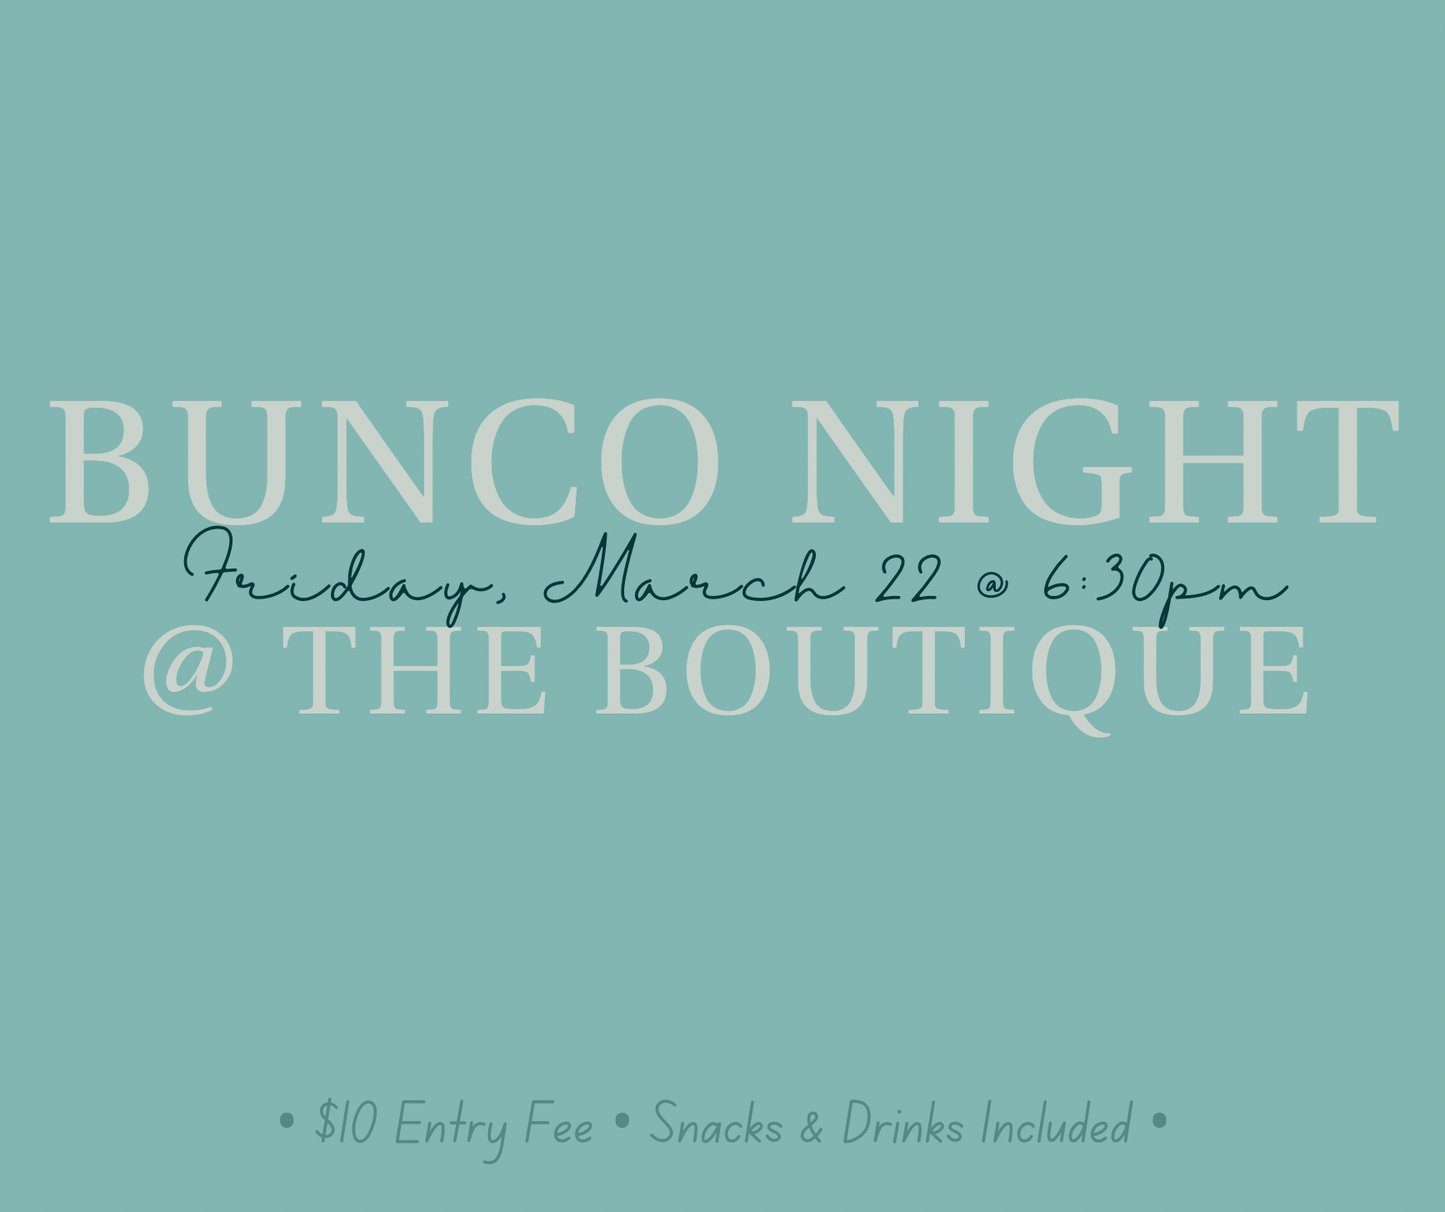 BUNCO NIGHT AT THE BOUTIQUE!